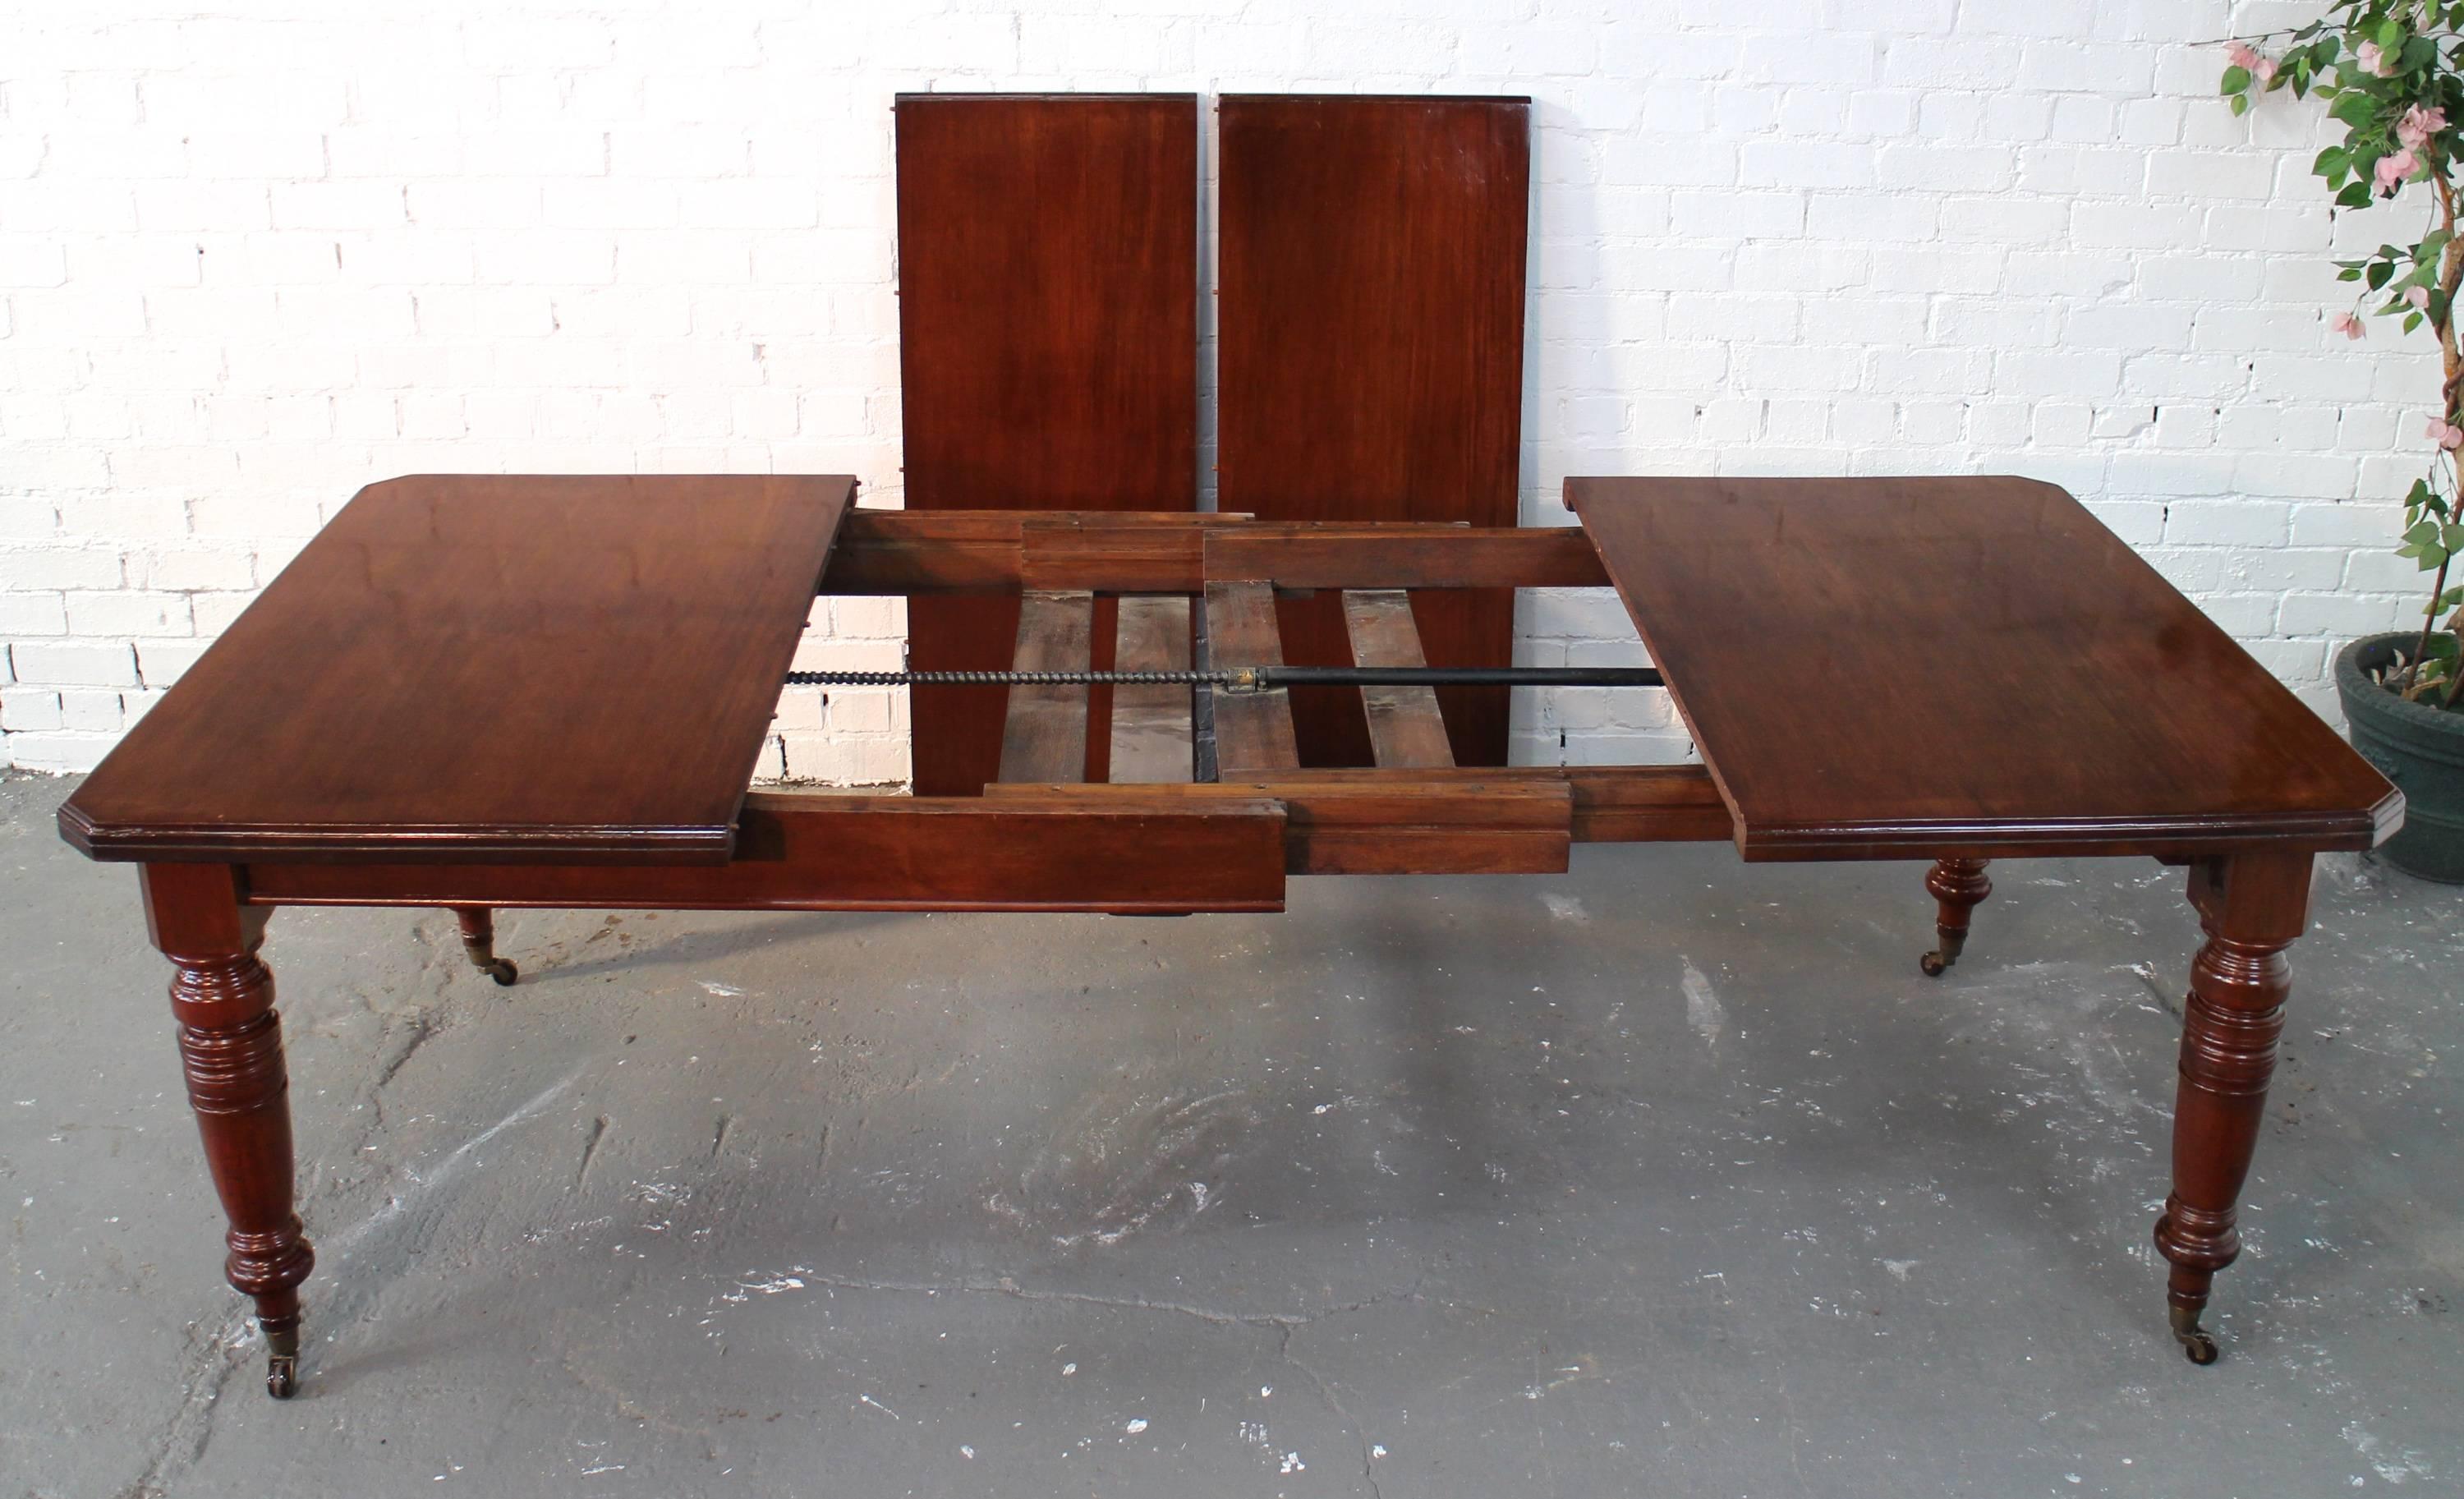 Brass Antique Victorian Mahogany Extending Dining Table and Two Leaves, Seats 10